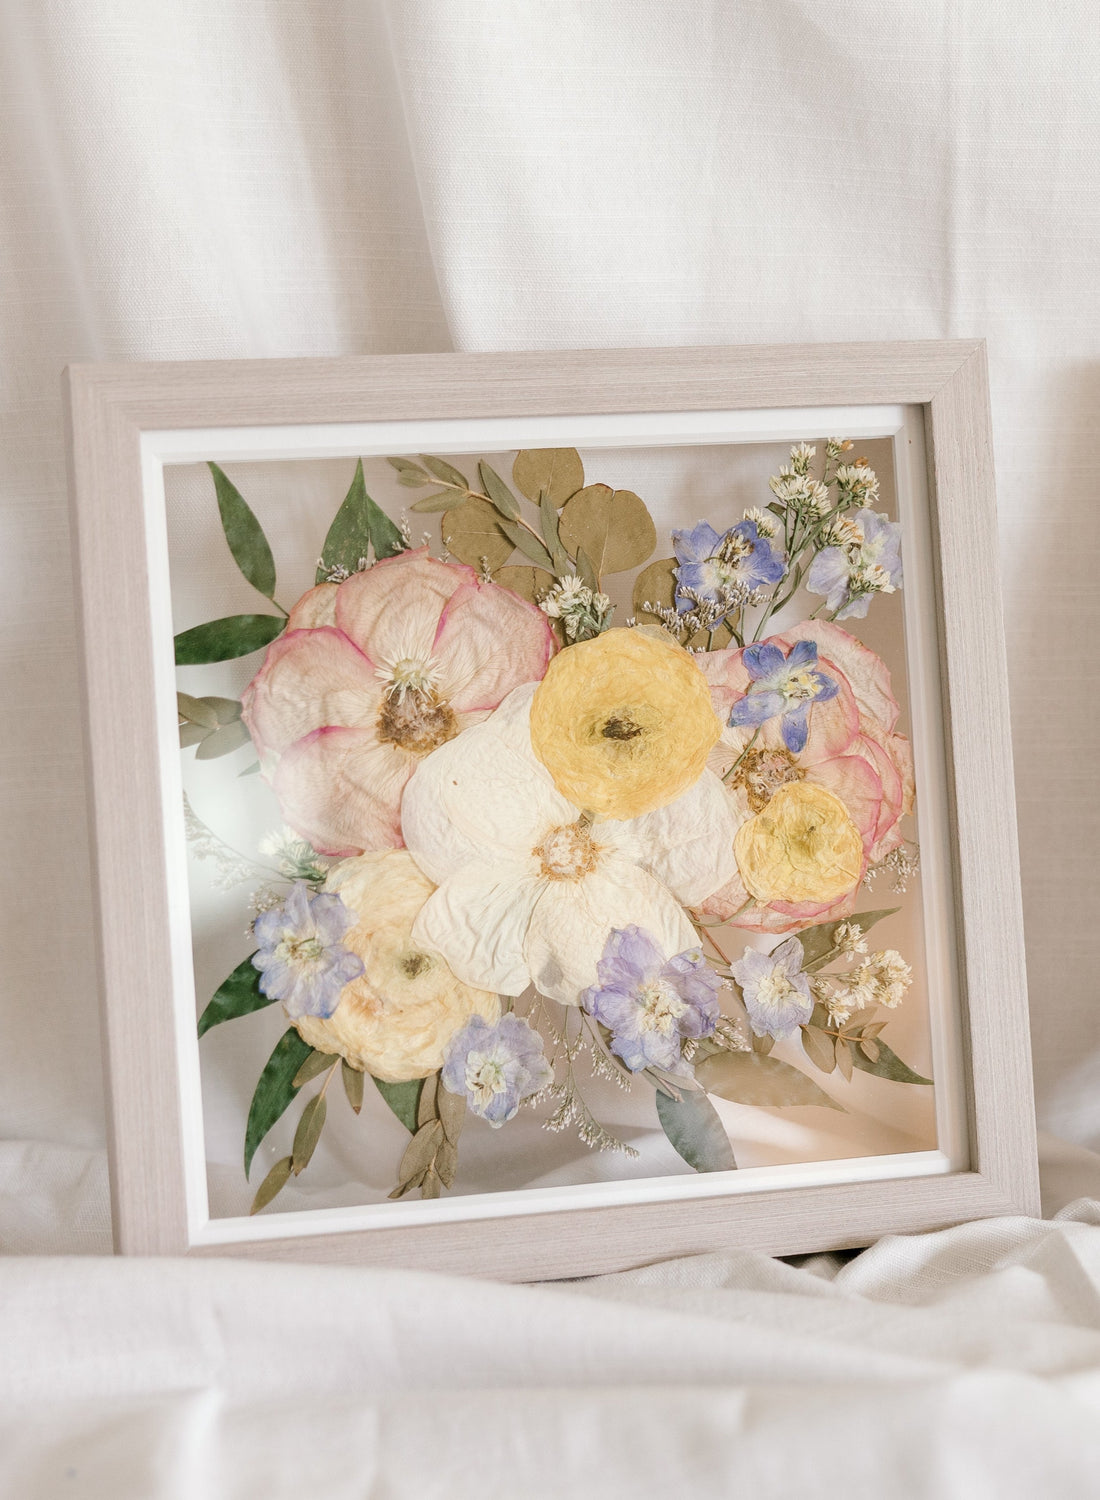 Spring themed pressed flowers preserved in a 10x10 inch floating grey wood frame.